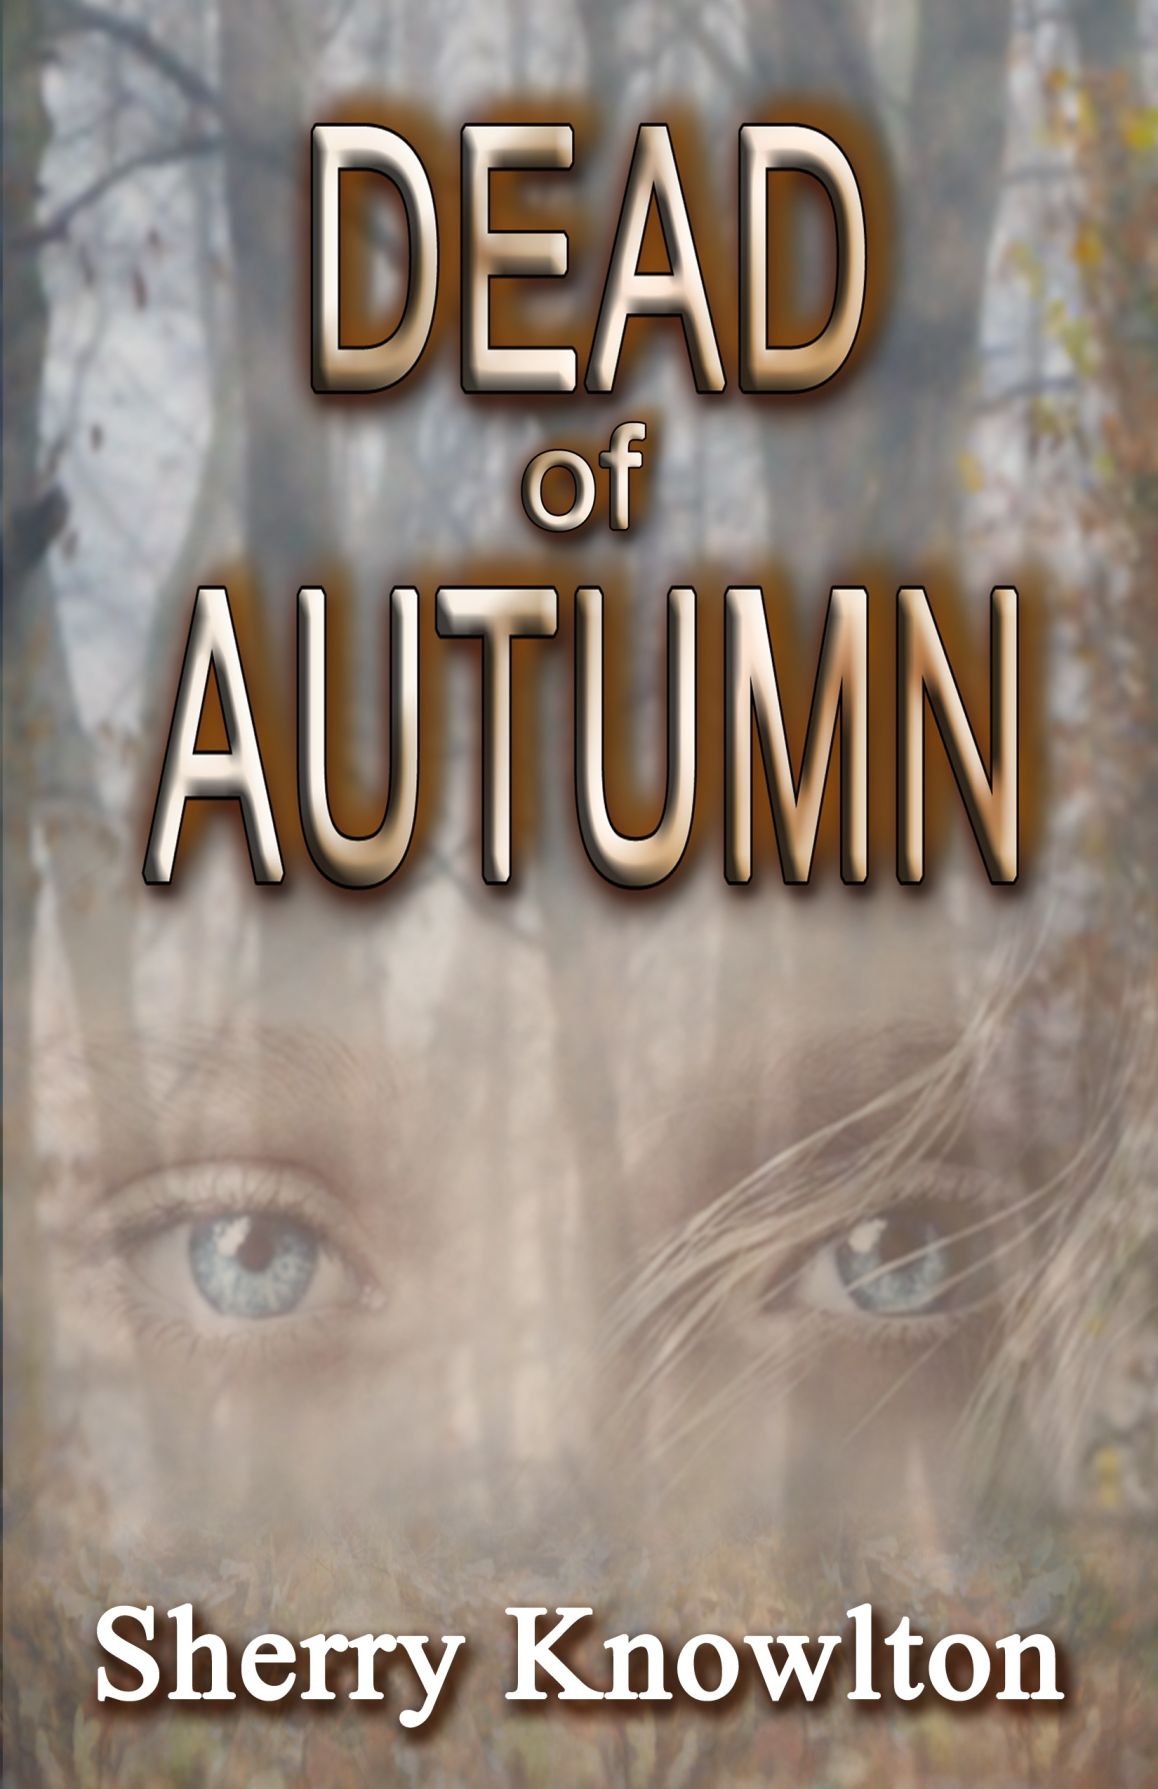 Local author casts mystery in ‘Dead of Autumn’ | Vts News | shipnc.com